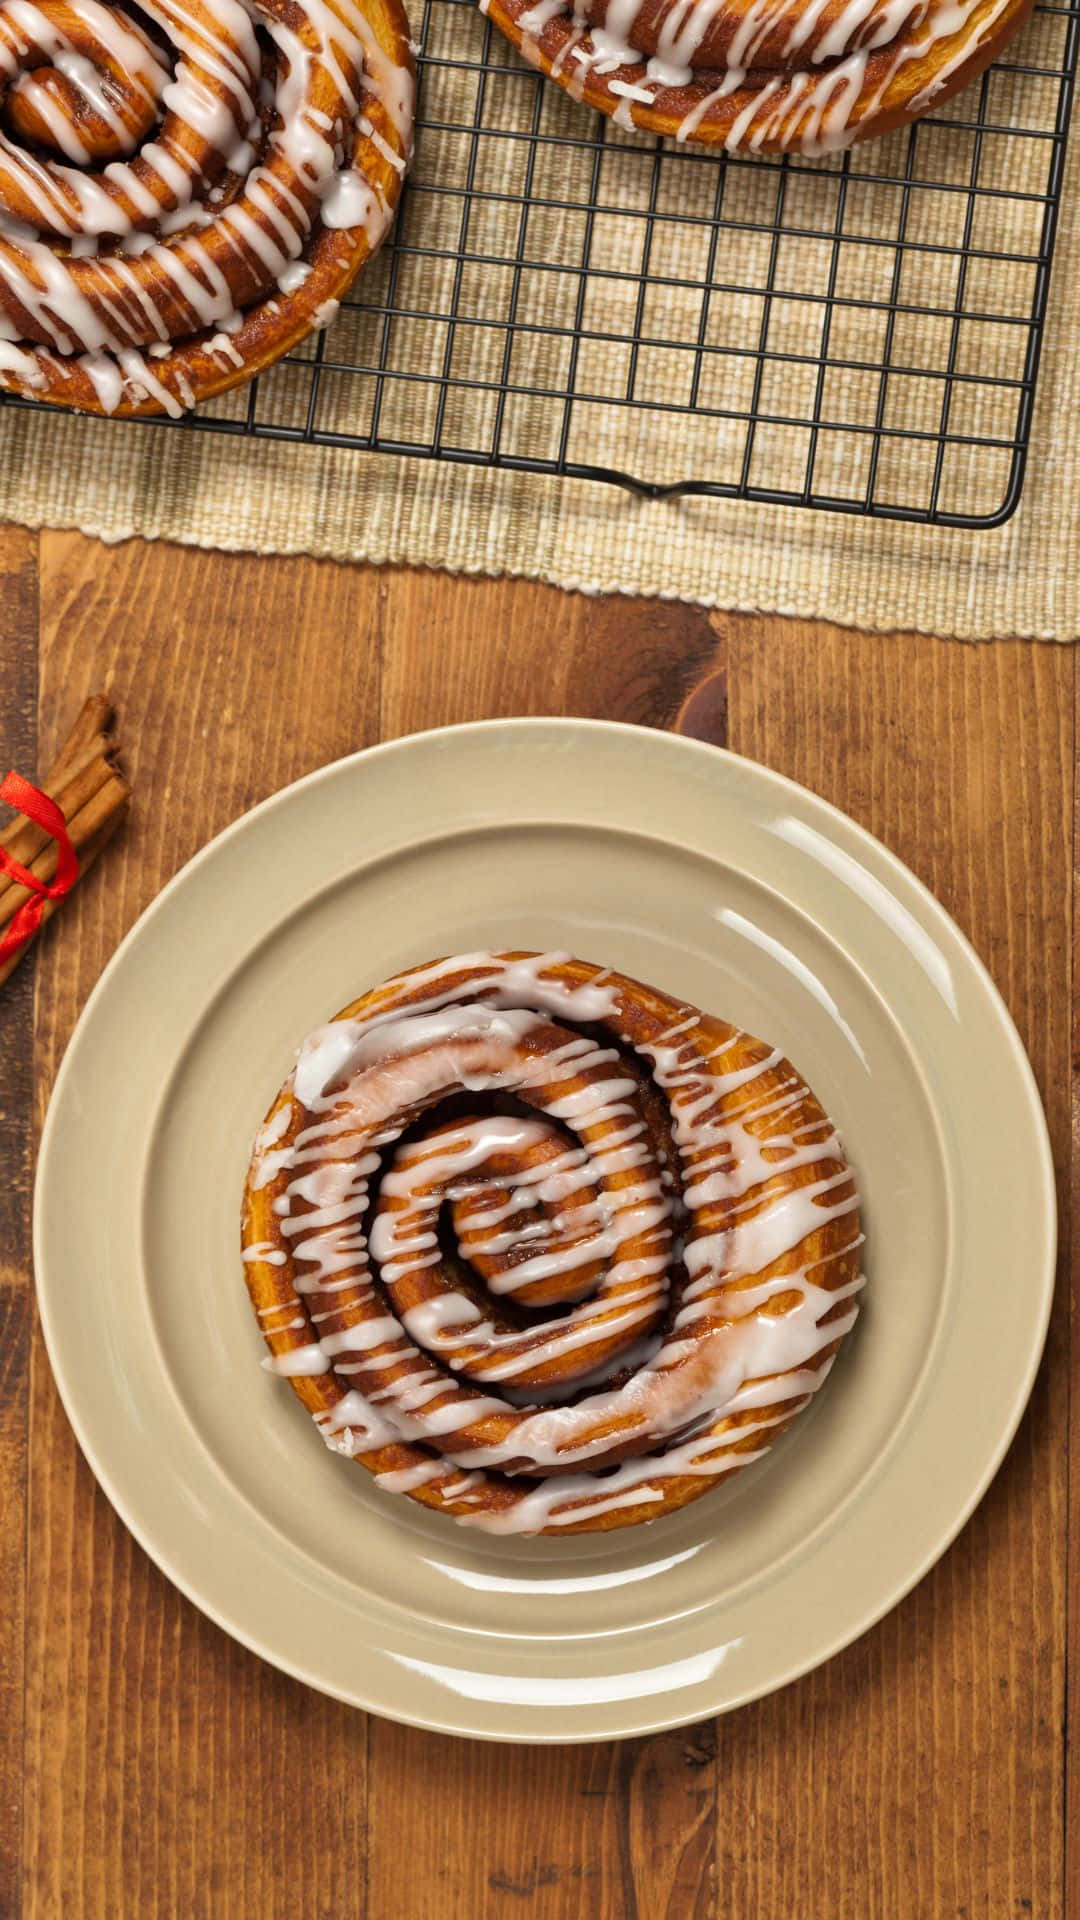 Freshly Baked Cinnamon Roll With Icing Wallpaper